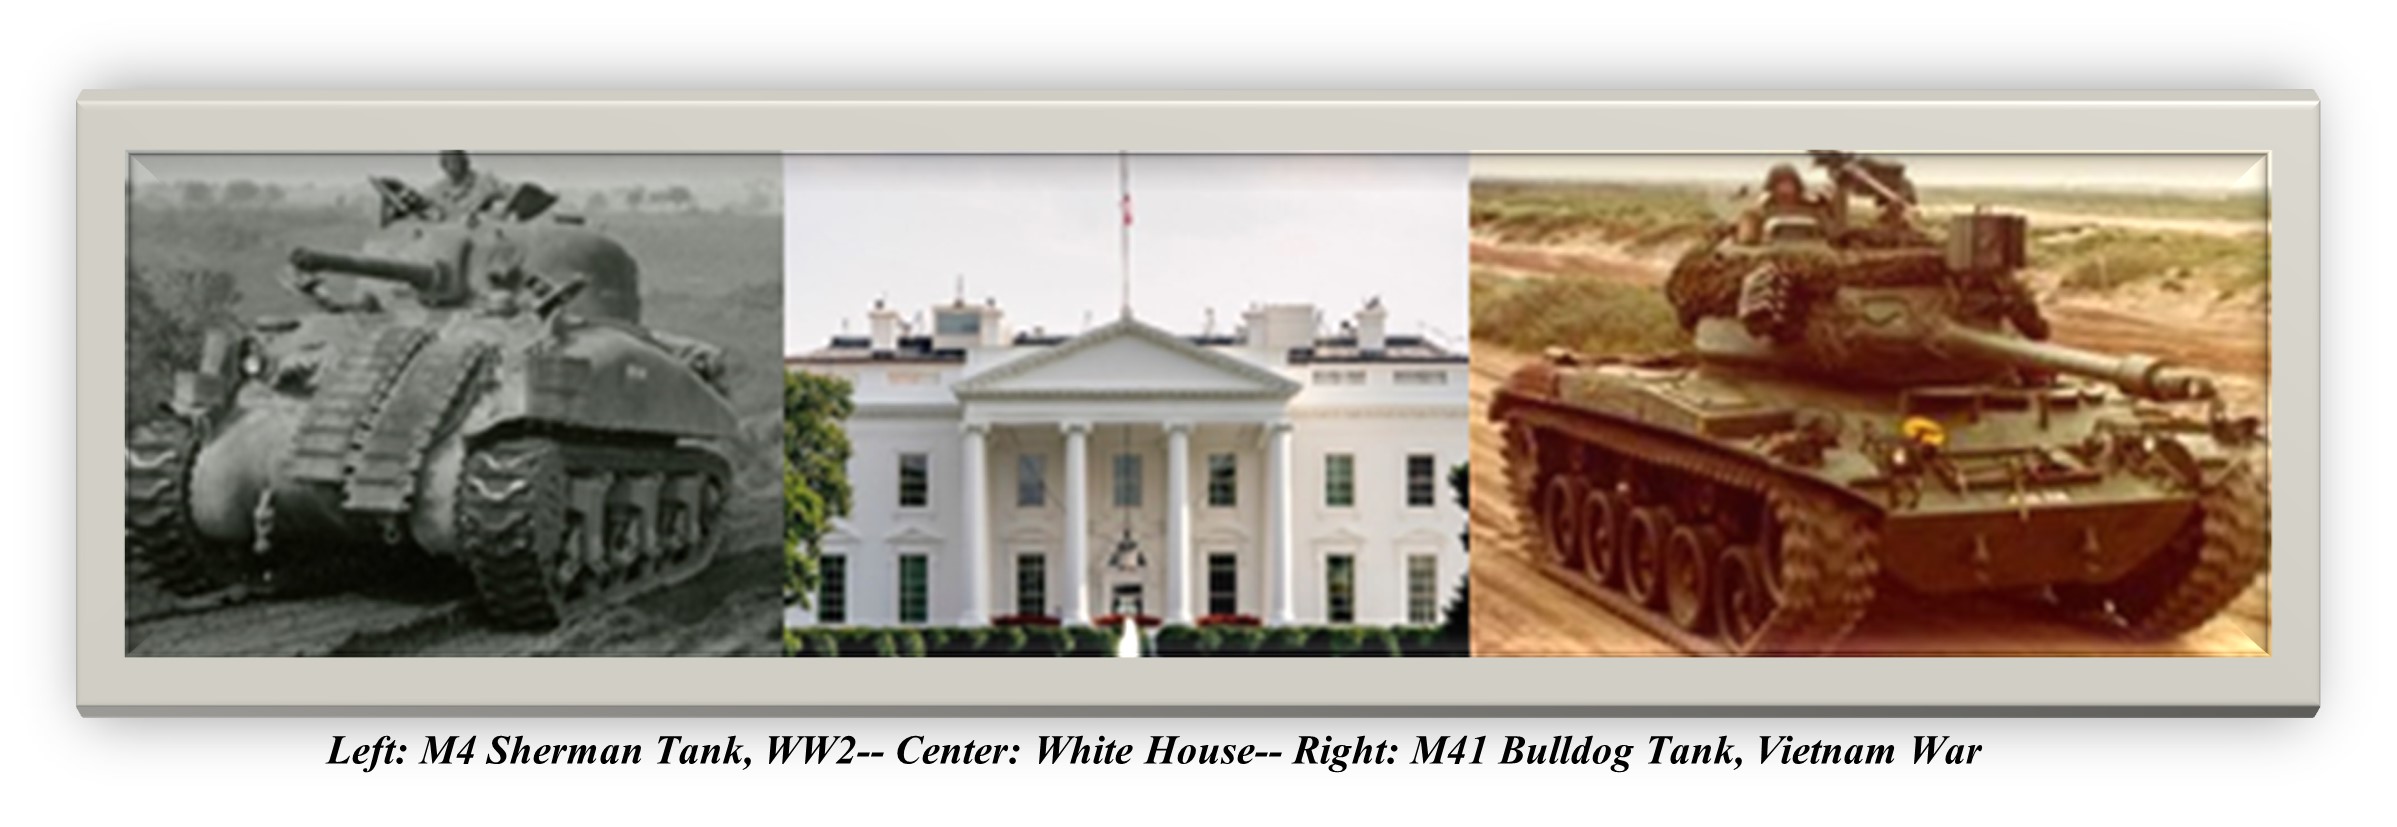 Tanks and White House